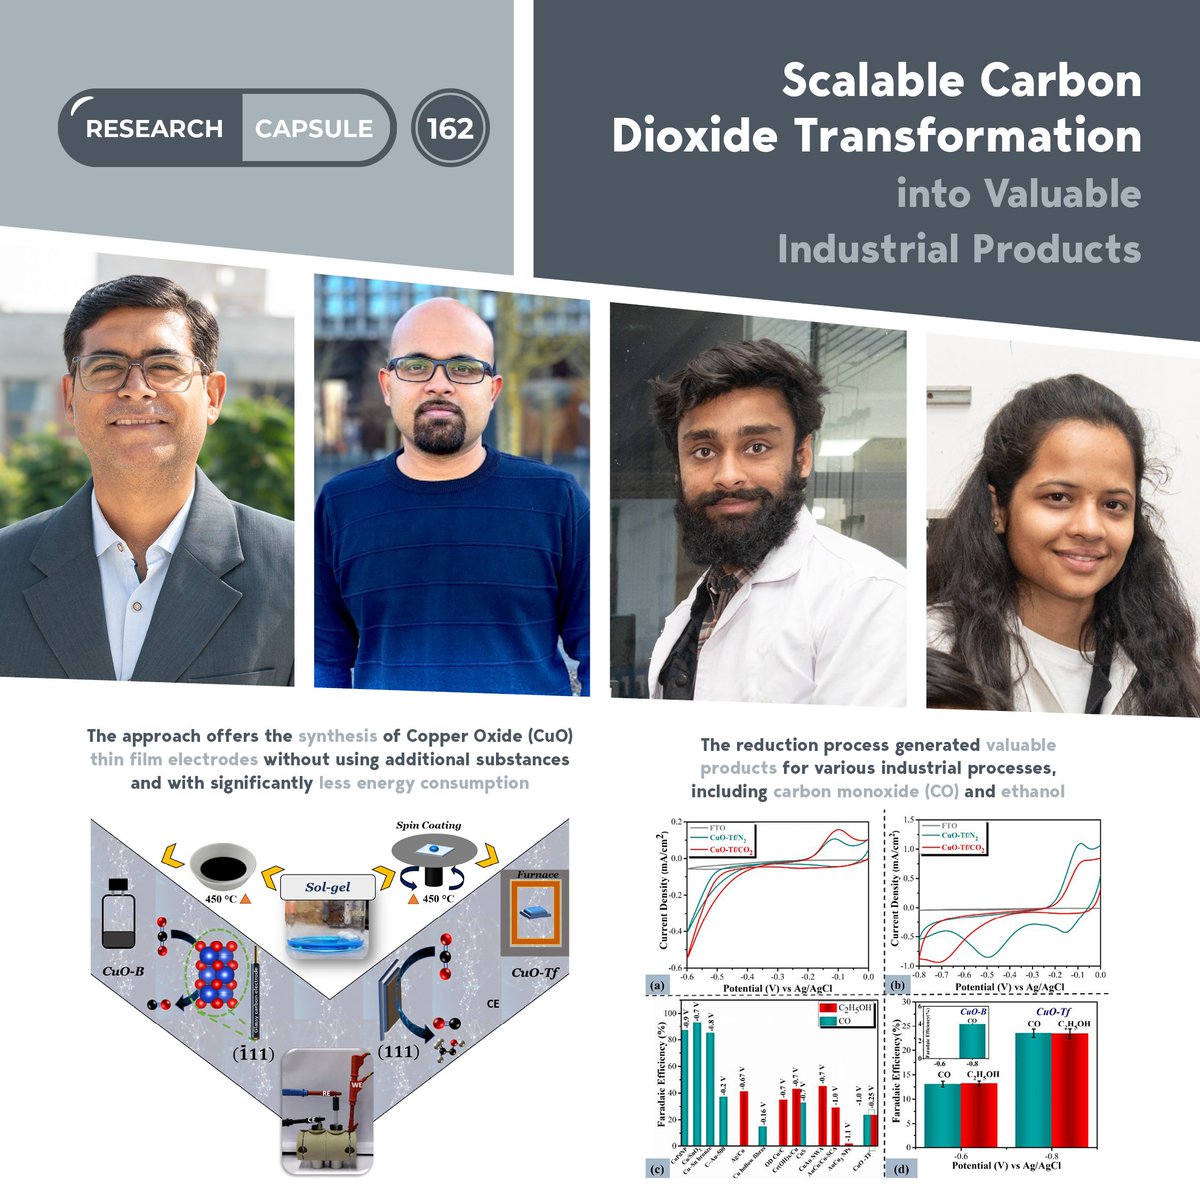 #IITGNResearchCapsule: Researchers at IITGN have devised a simple method for carbon dioxide (#CO2) reduction. The approach could be an important advance to #sustainably cater to the rising global #energy demand while reducing reliance on conventional energy sources.